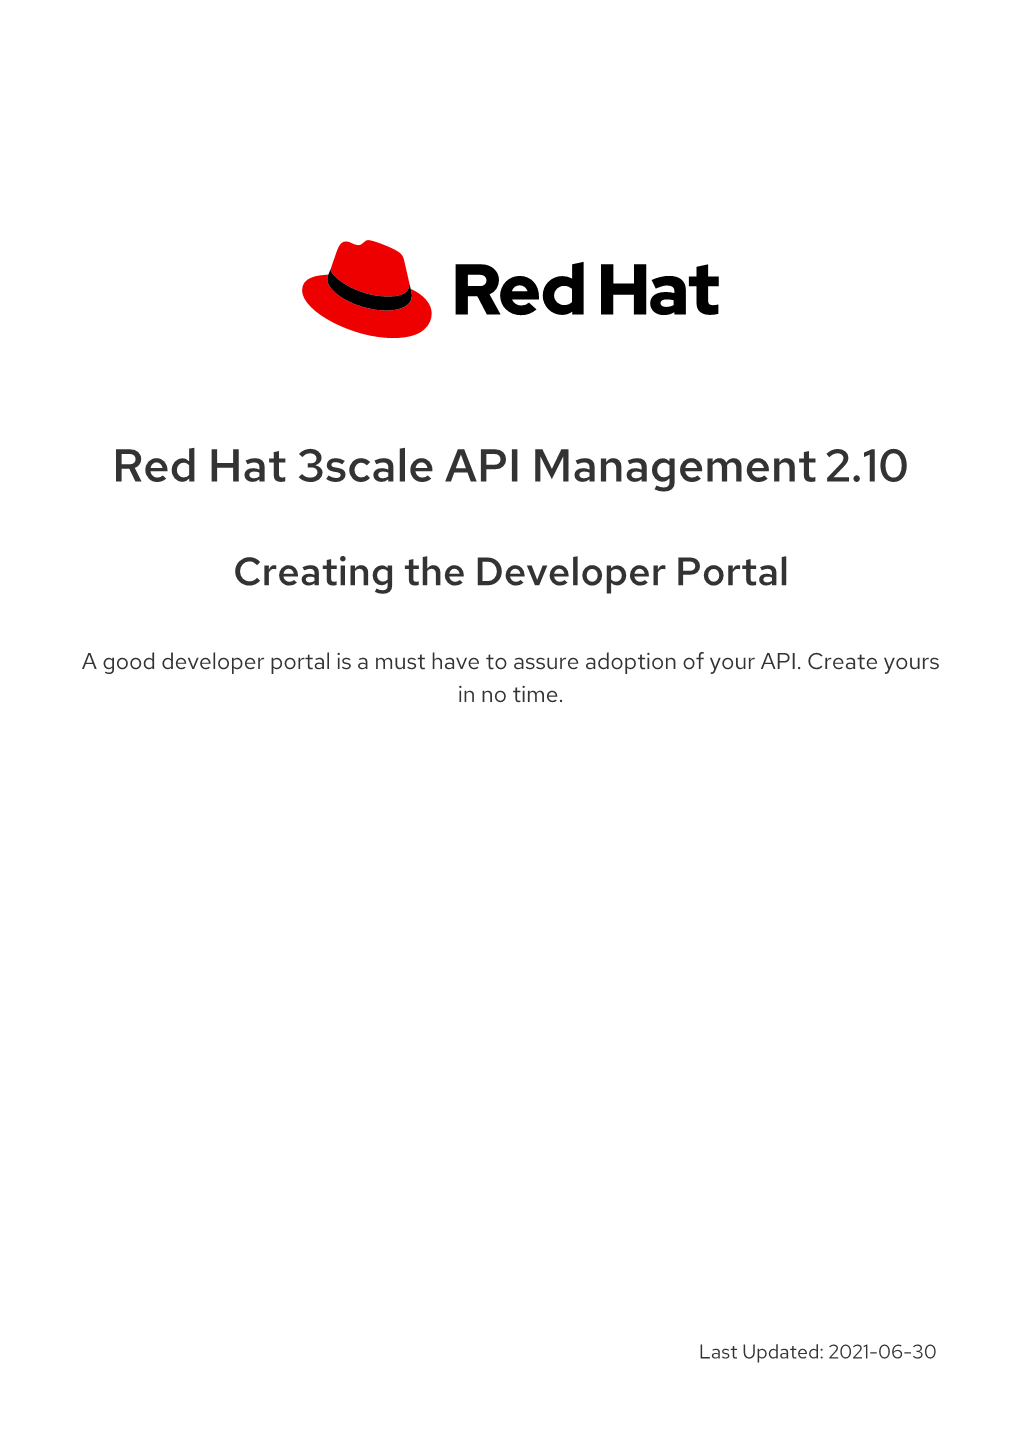 Red Hat 3Scale API Management 2.10 Creating the Developer Portal